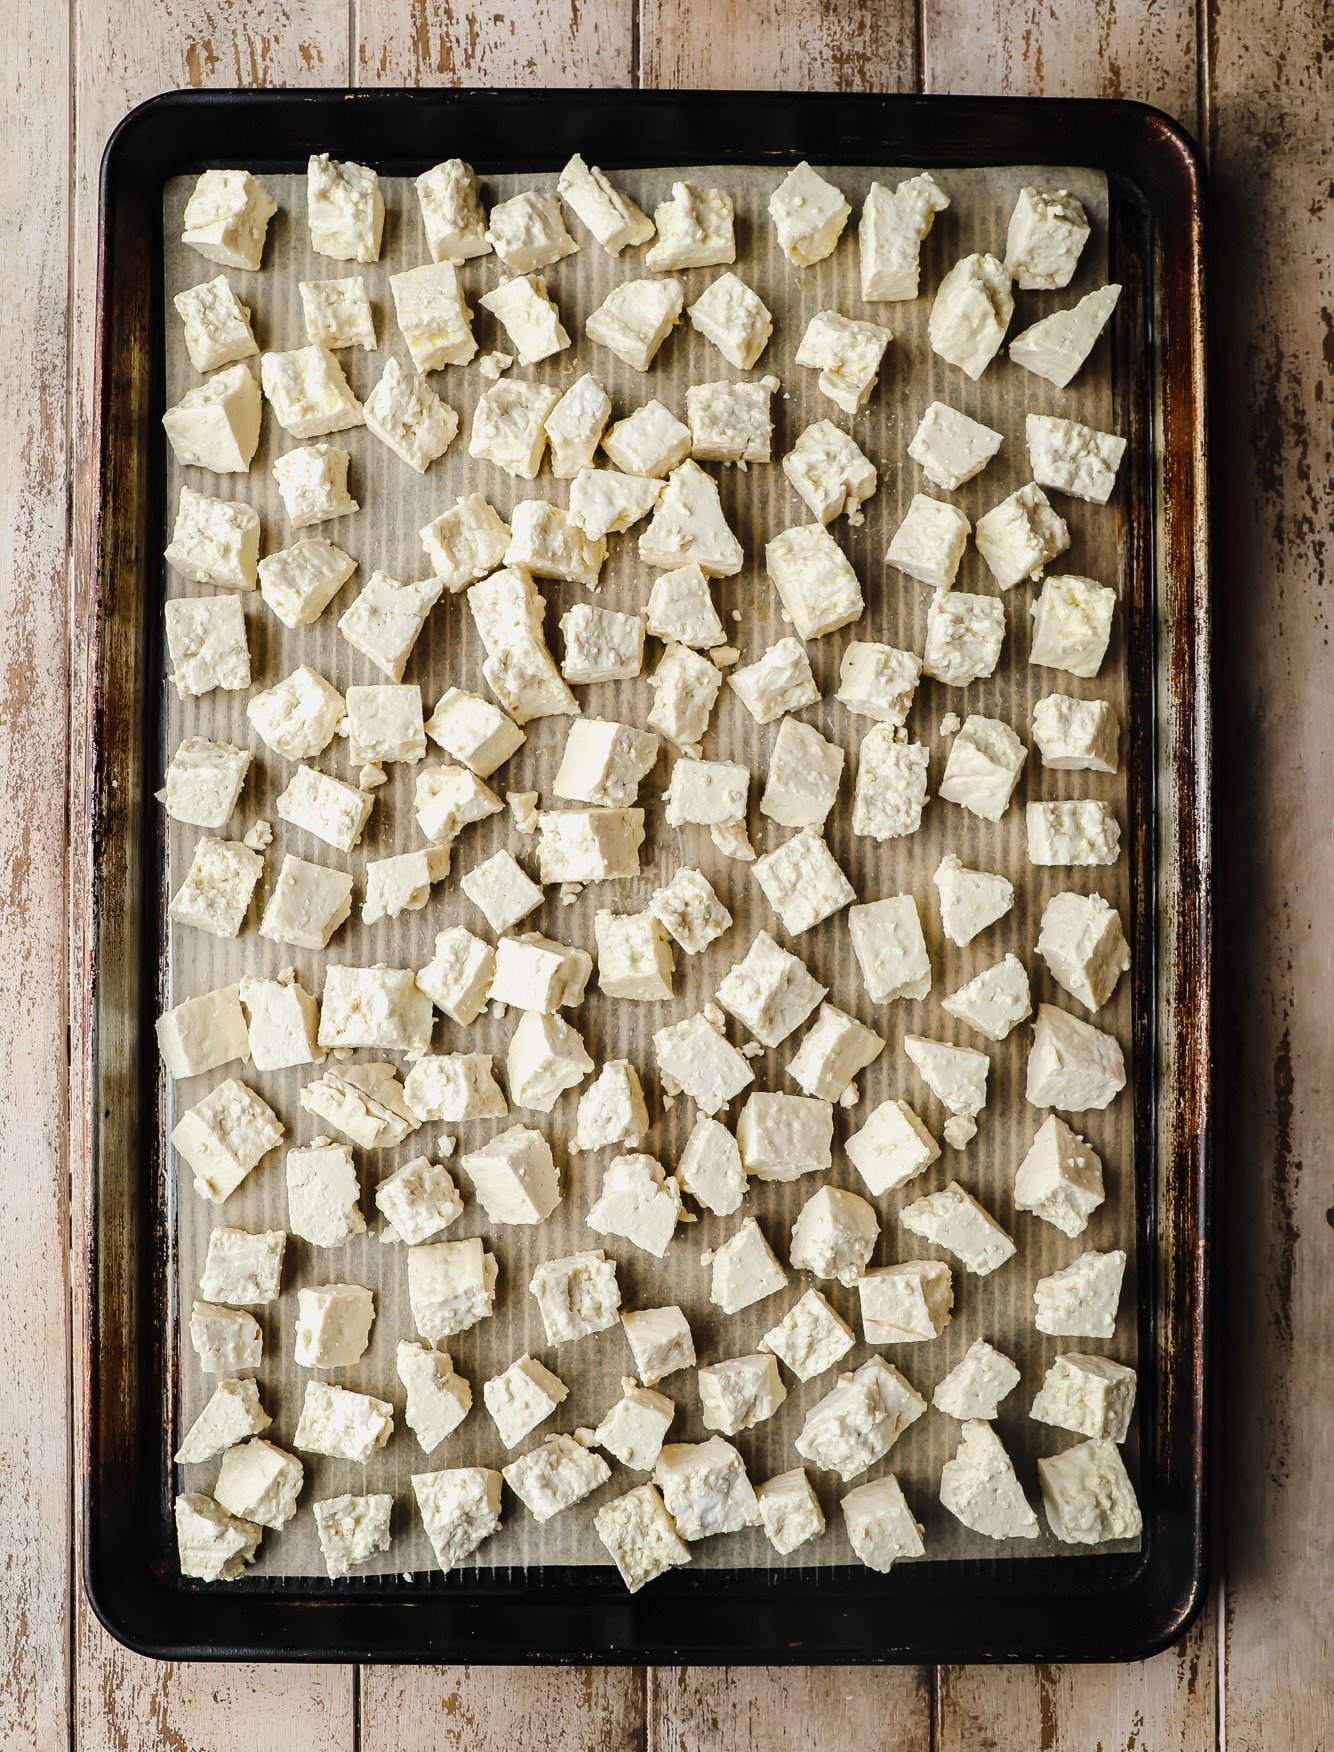 small ripped tofu pieces laying in an even layer on a baking sheet.